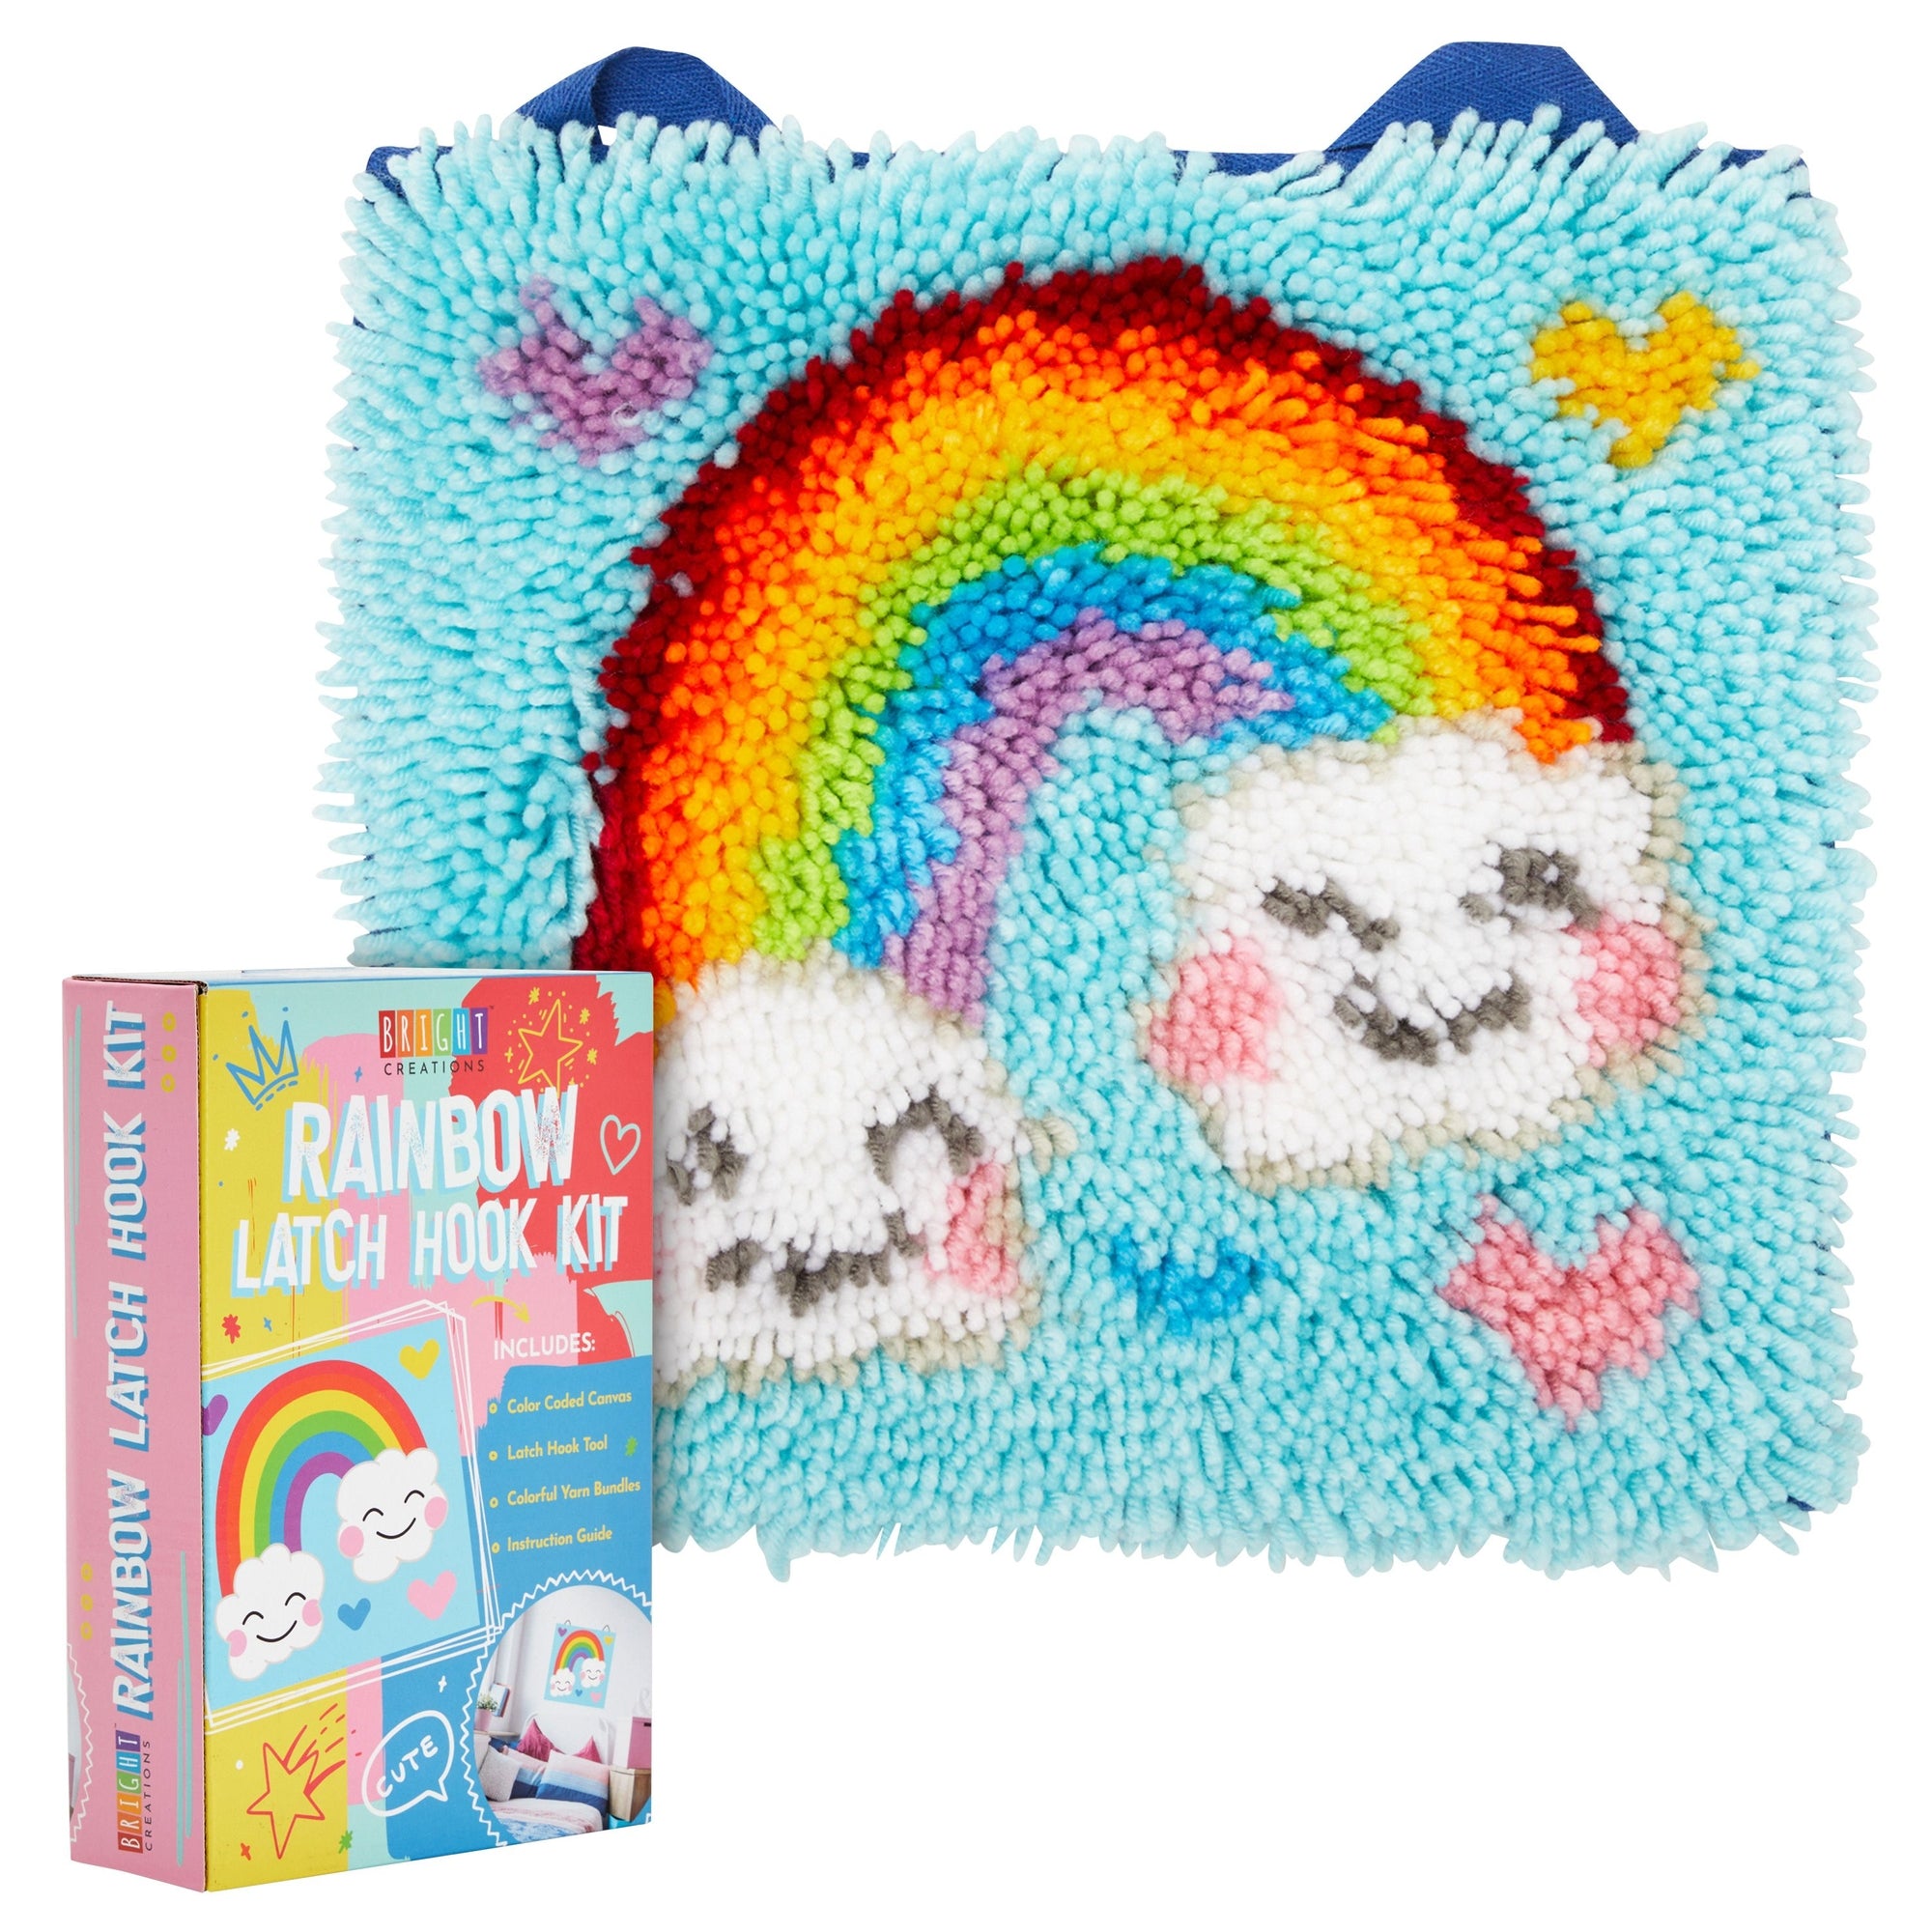 Mini Rainbow Latch Hook Rug Kit For Kids Crafts, Adults, and